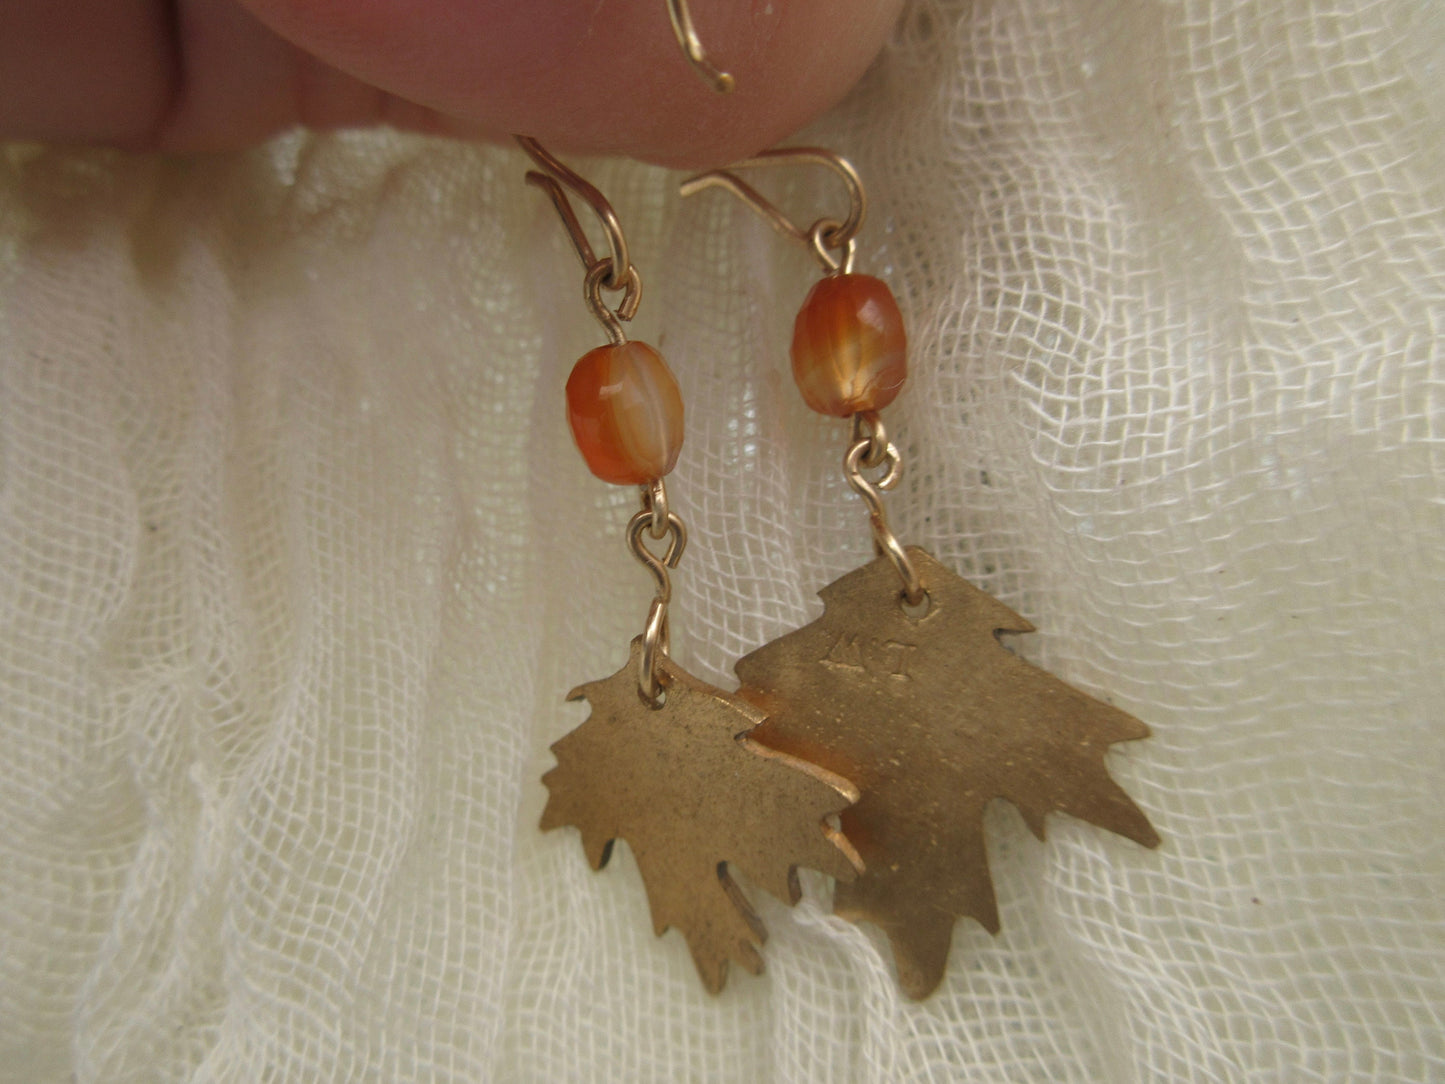 Brass maple leaf earrings with carnelian and gold-filled ear wires